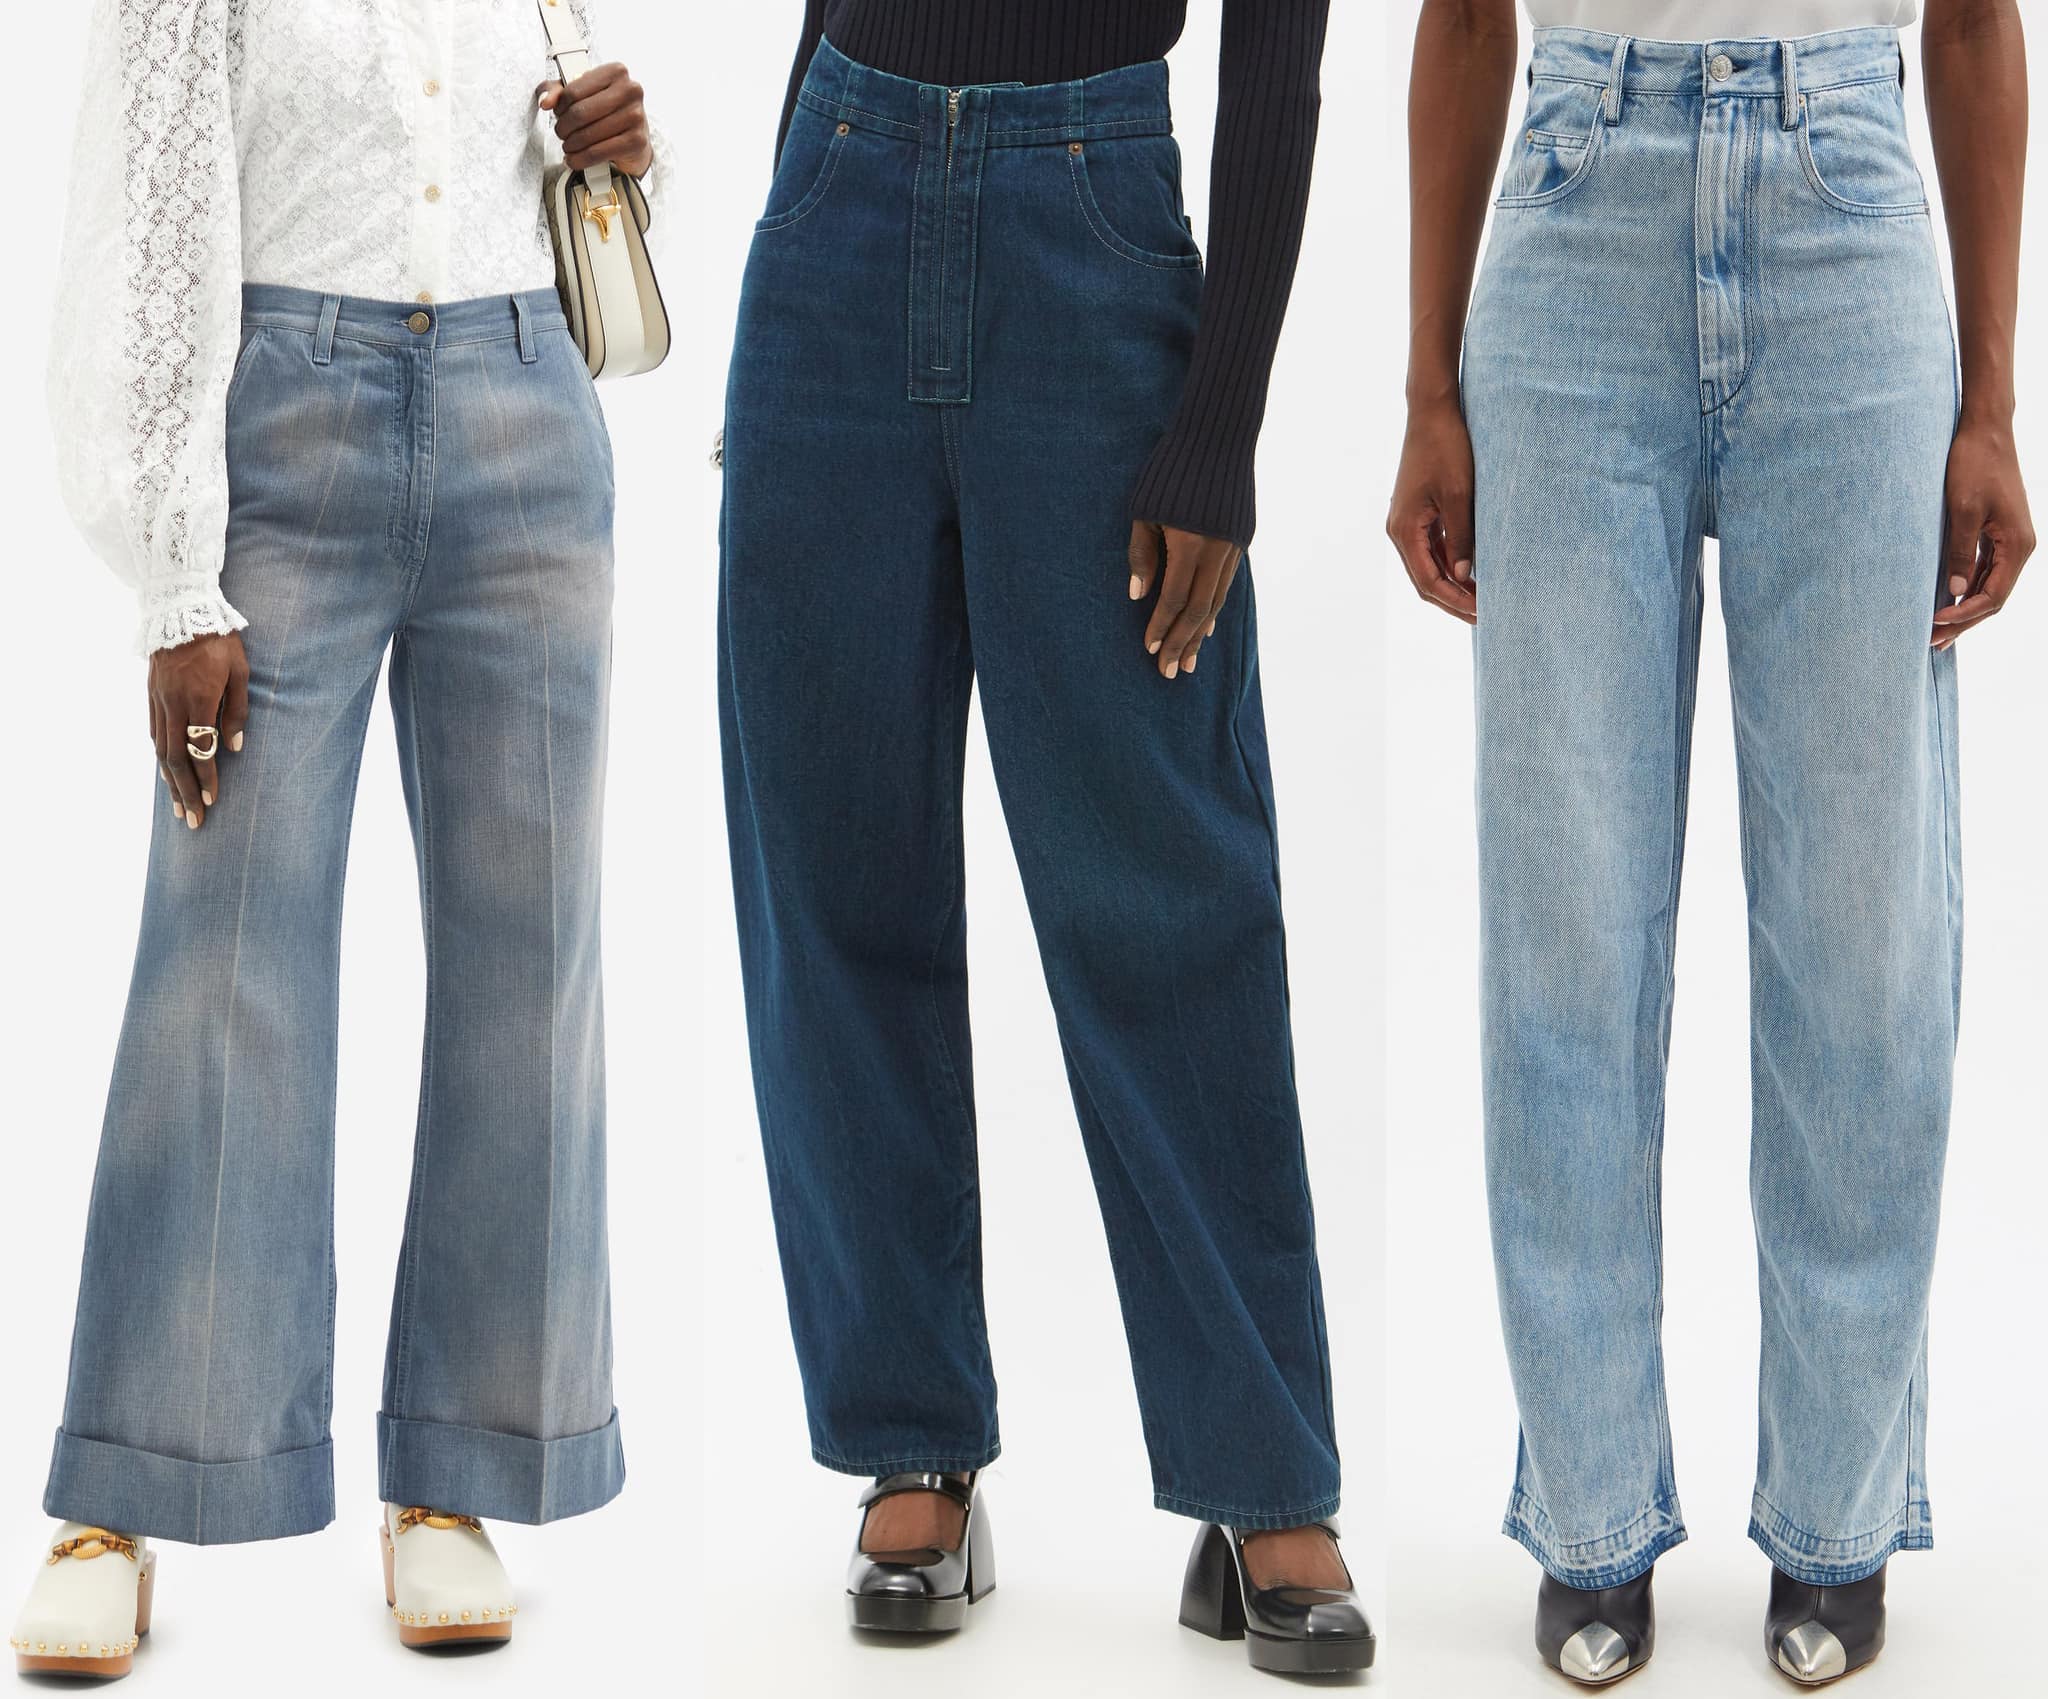 Elevate your style with high-rise jeans featuring a full-length, wide-leg silhouette